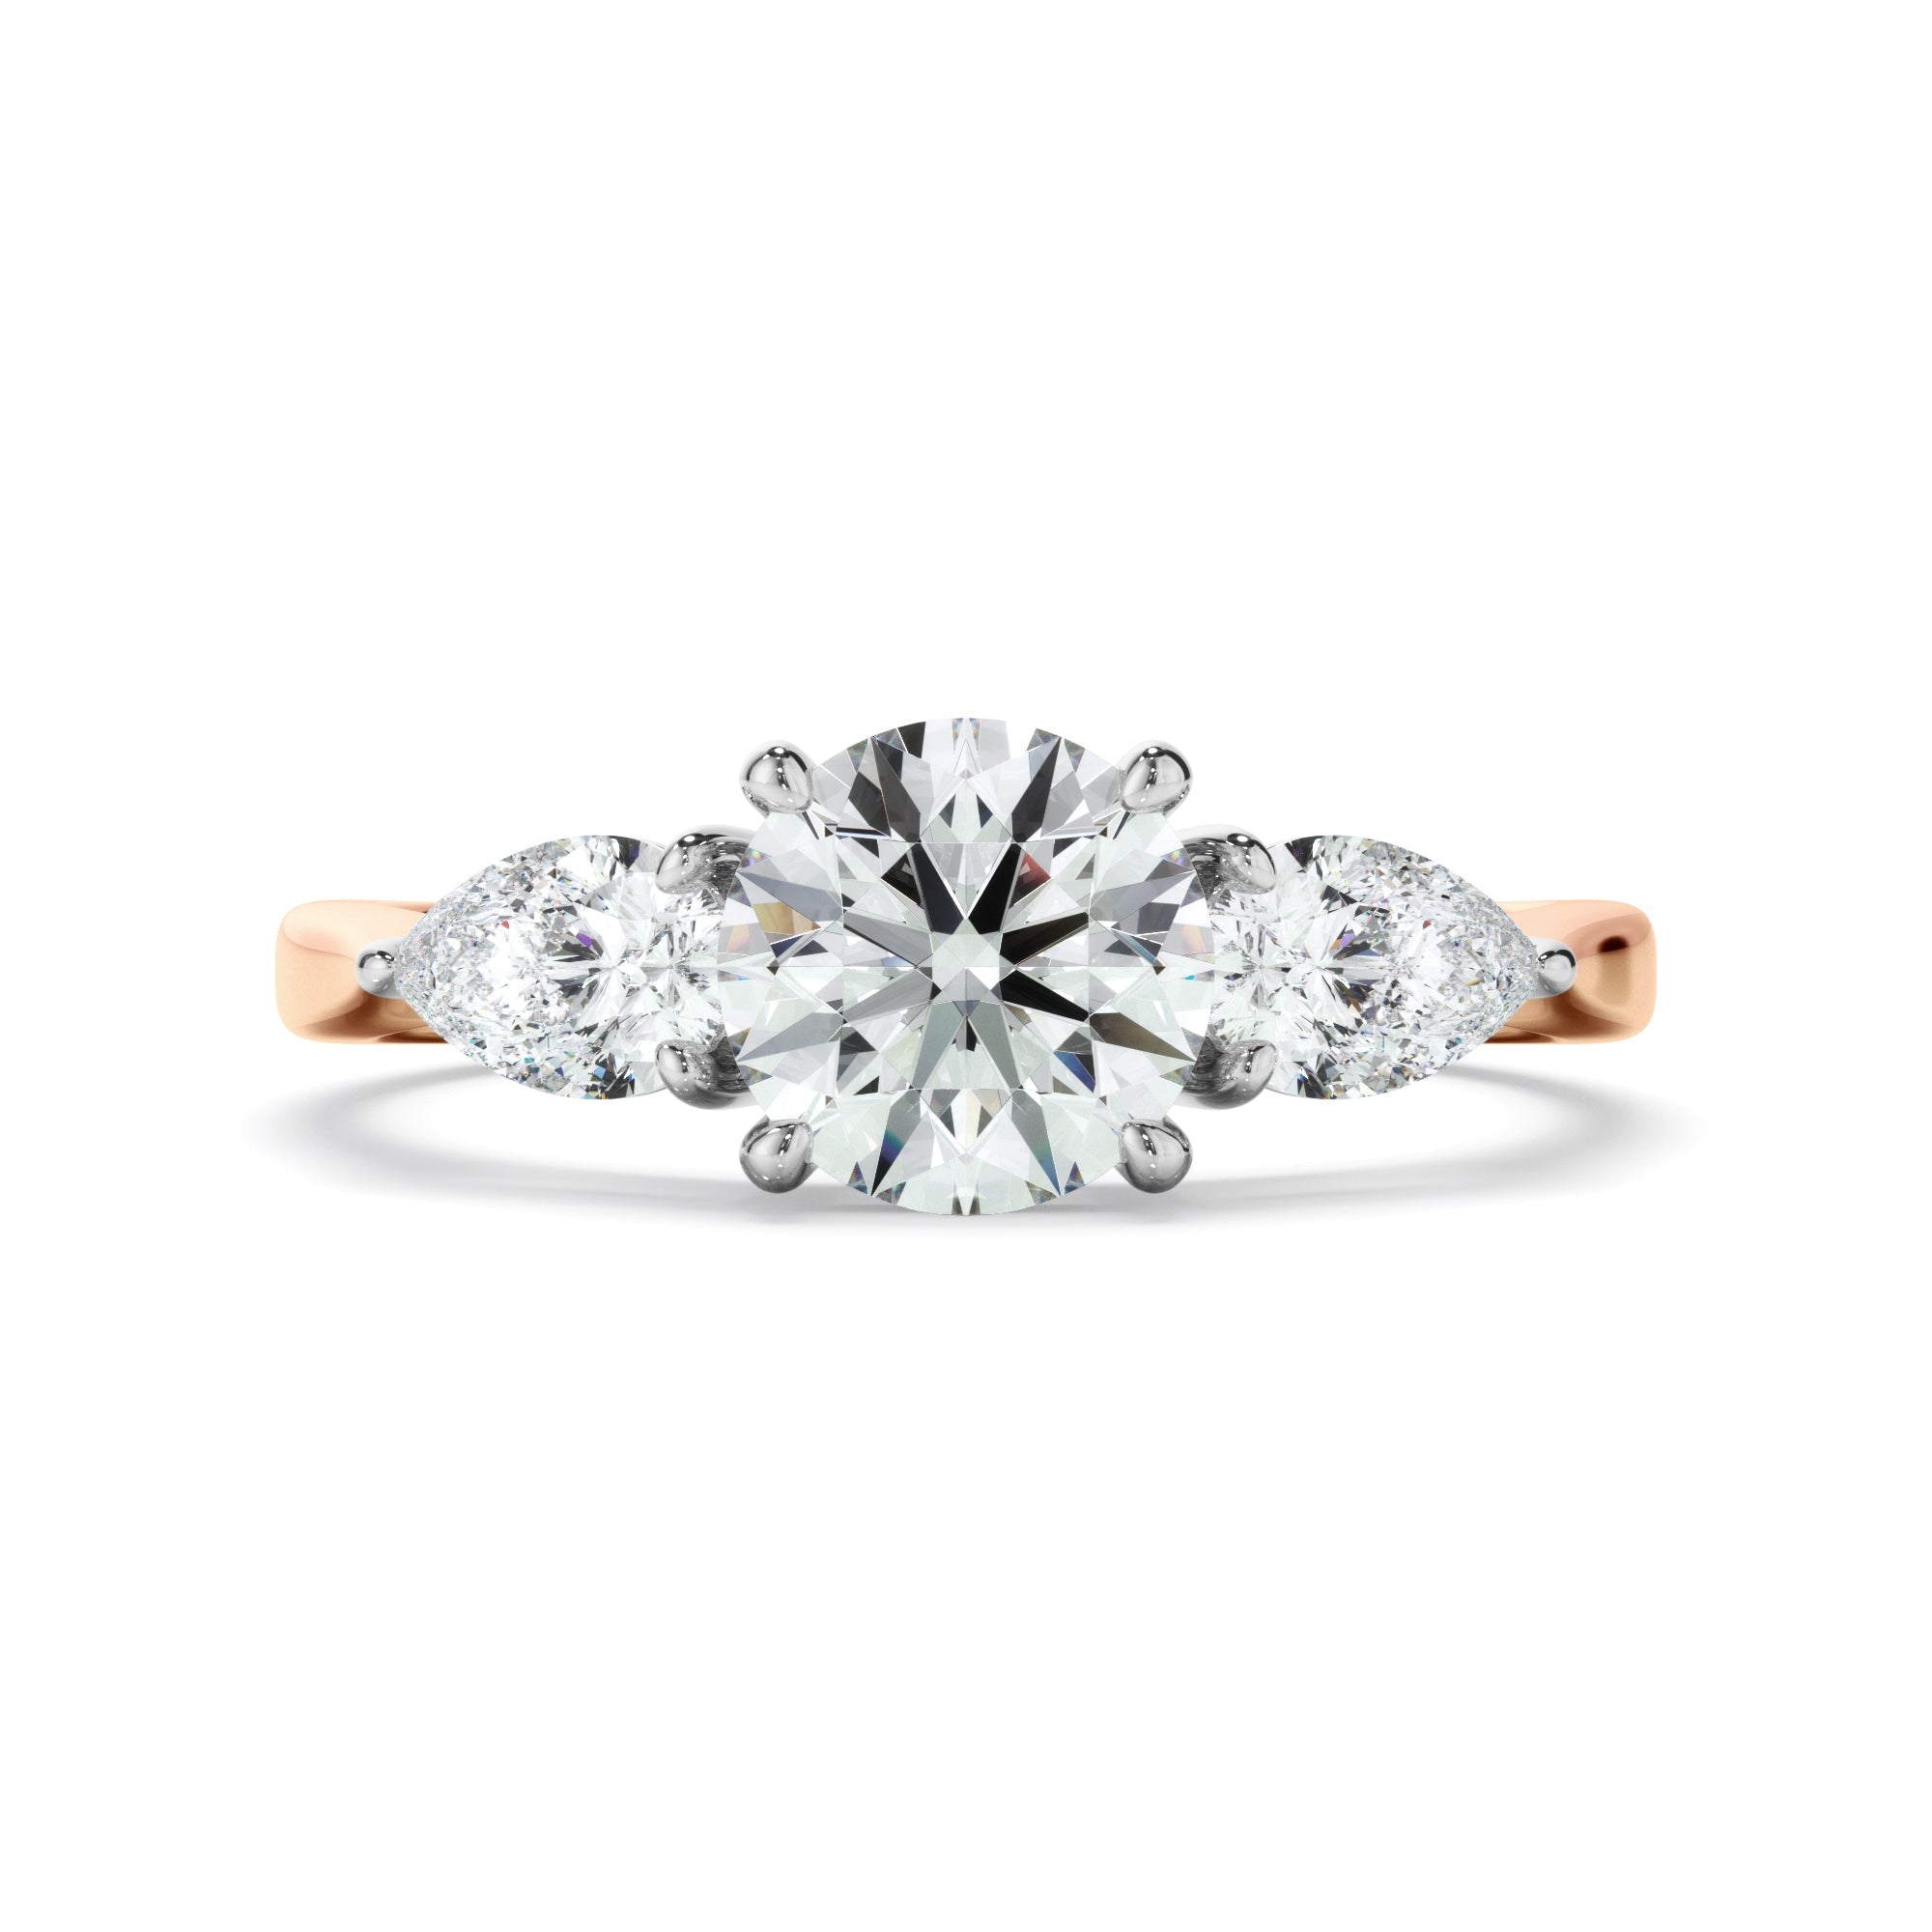 Round Brilliant Cut Diamond Engagement Ring With Pear Cut Diamond Sides